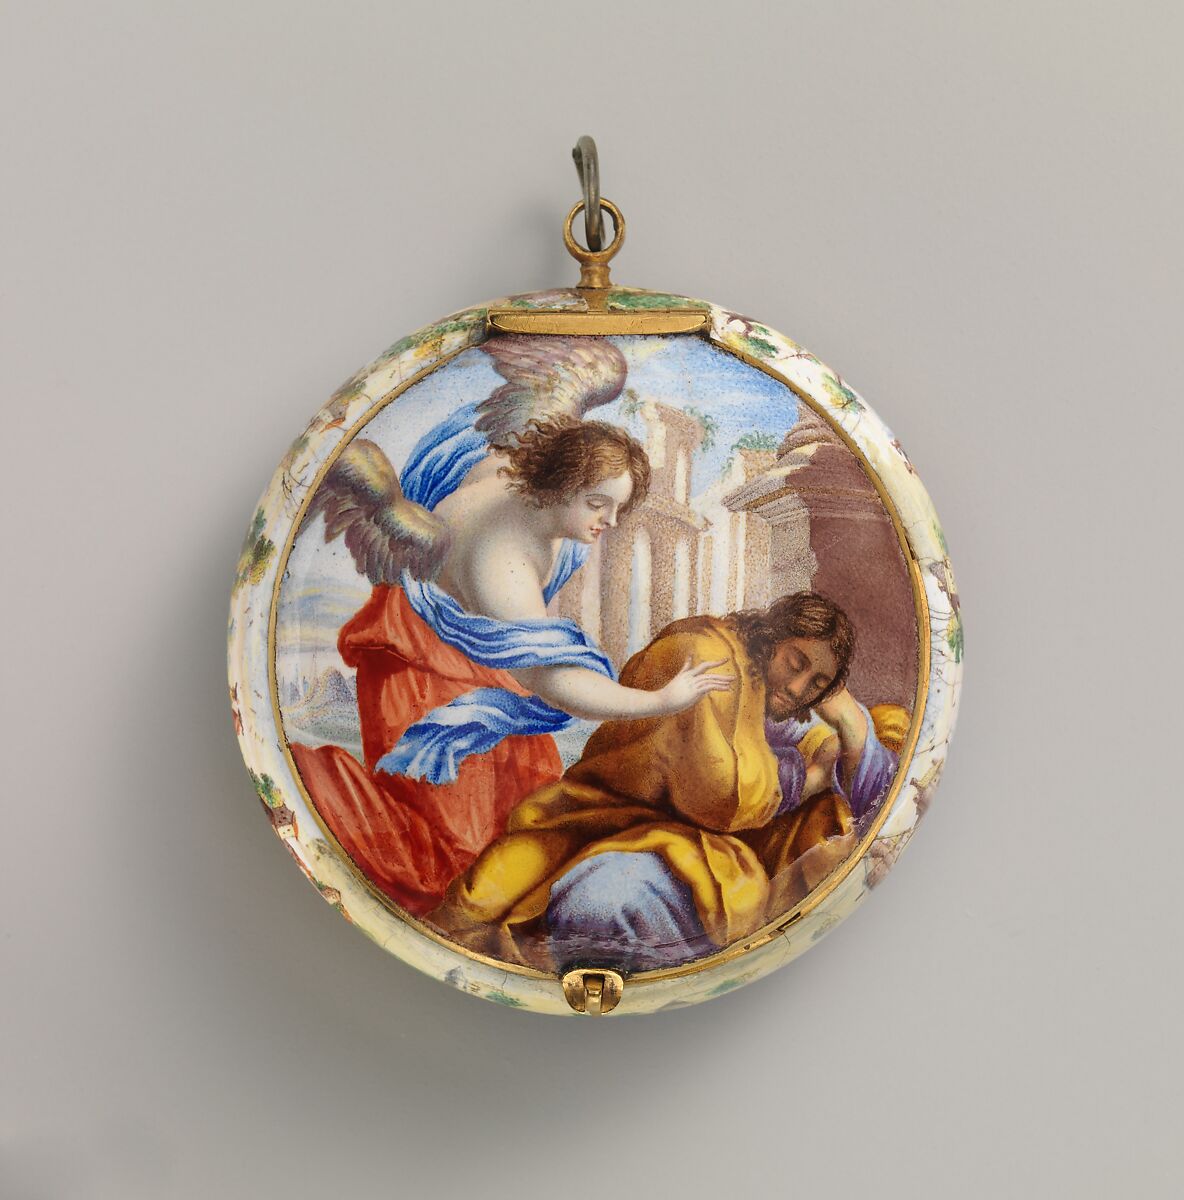 Watch, Watchmaker: Jacques Goullons (French, active Paris, 1626–died 1671), Case and dial: painted enamel on gold with brass hand; Movement: gilded brass and partly blued steel, French, probably Paris 